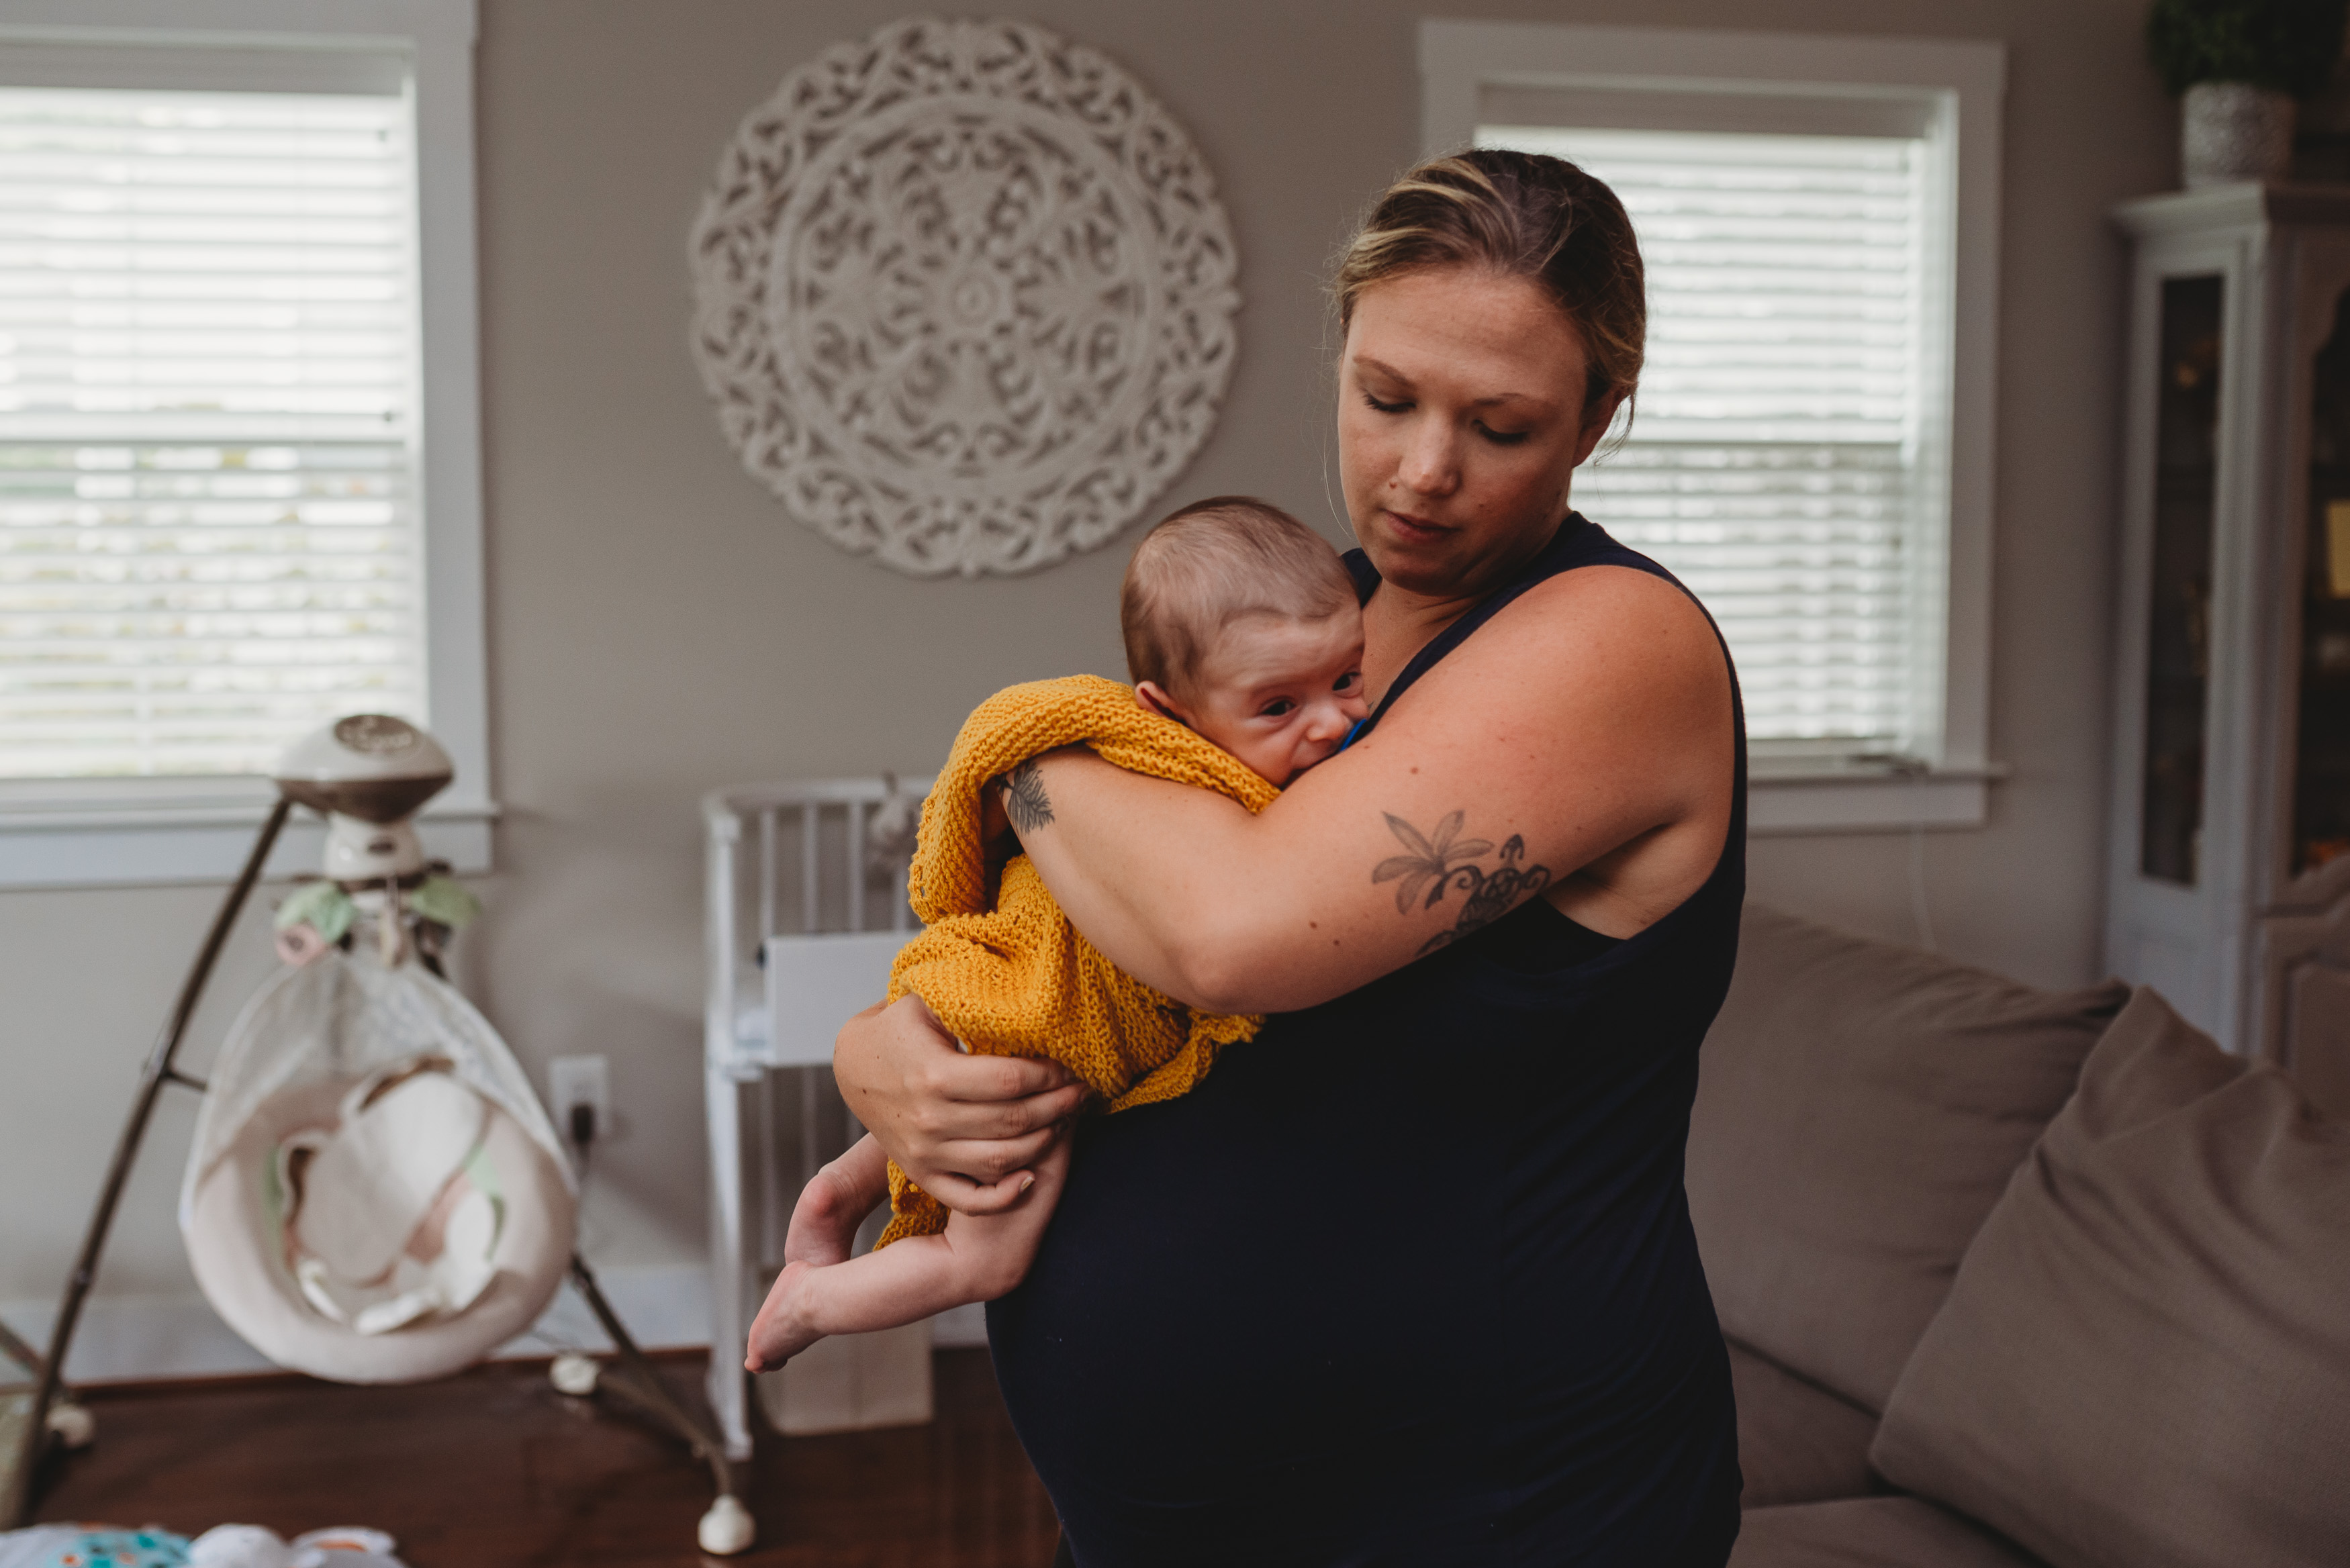 annapolis area doula helps new mom adjust to life with an infant.